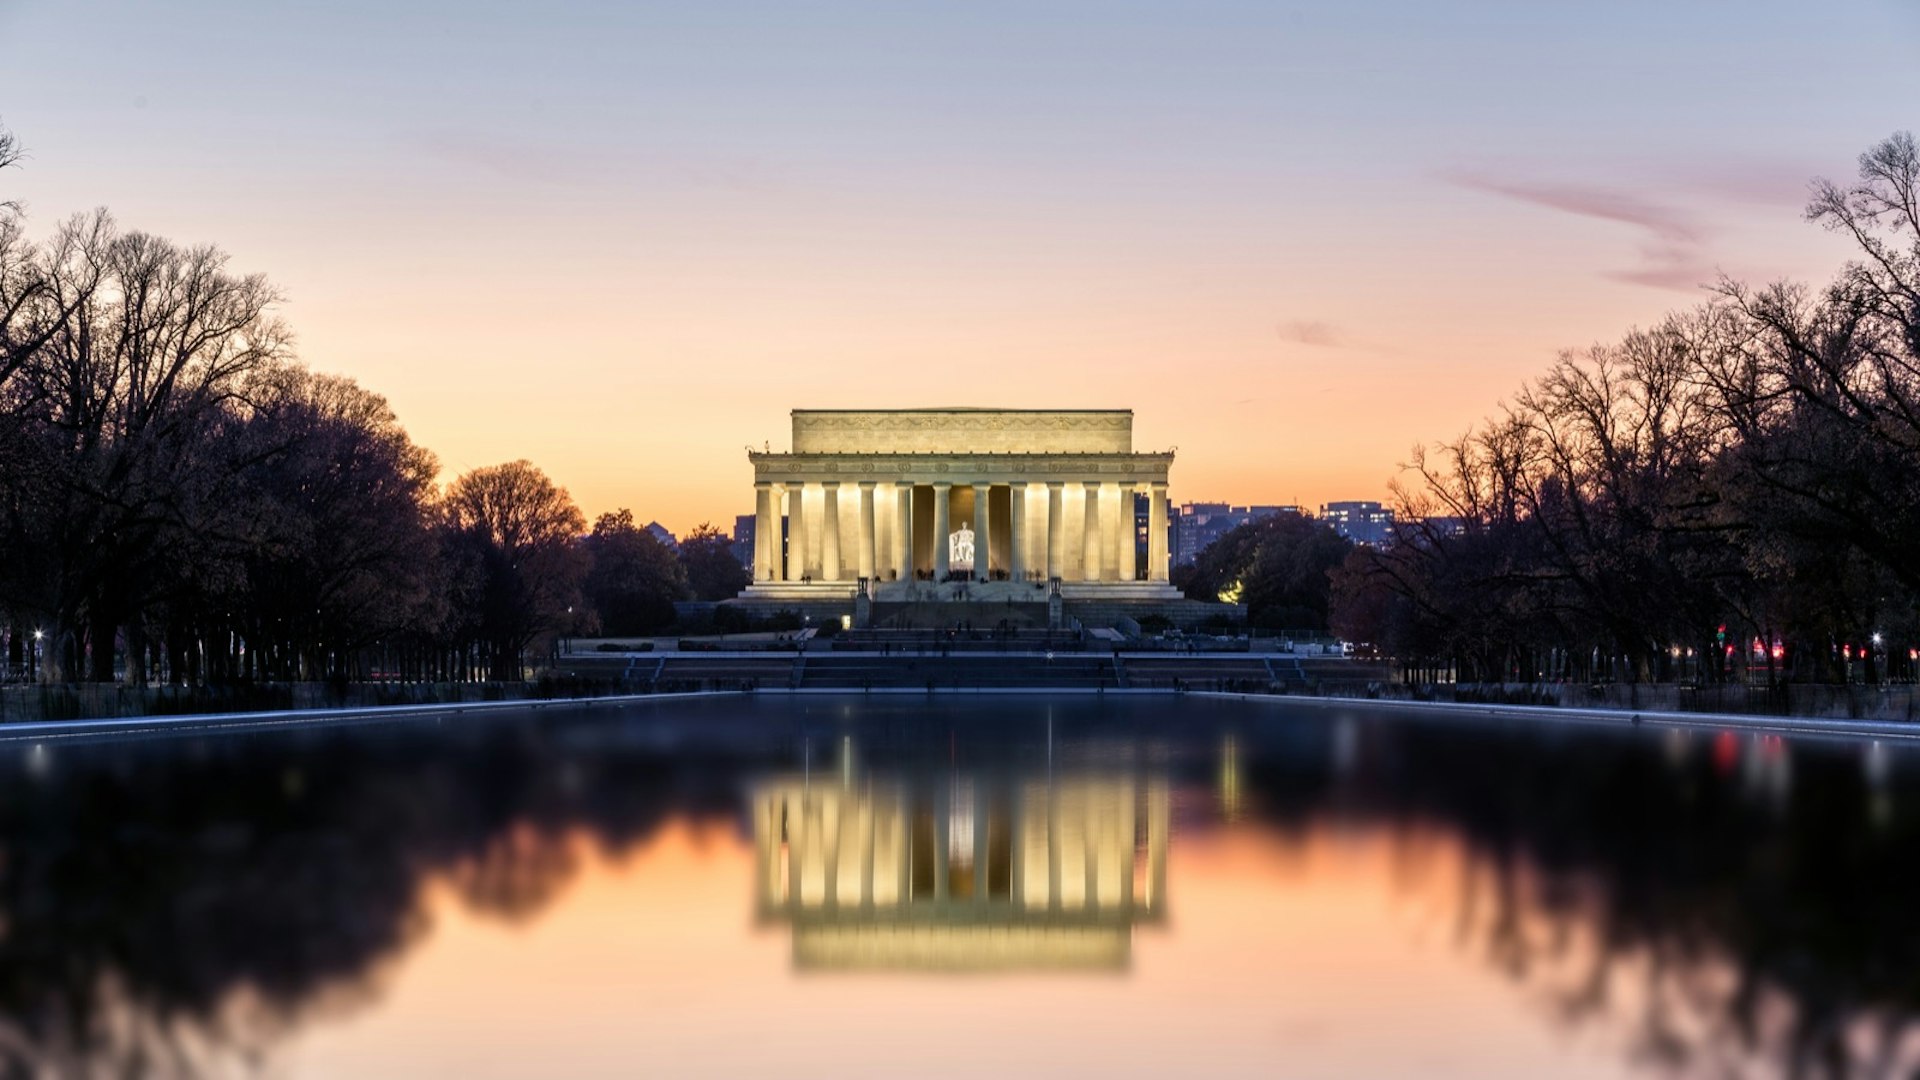 The Lincoln Memorial lit up at night reflected in the pond below. A trip to Washington isn't complete without a selection from the audiobooks for US road trips. 